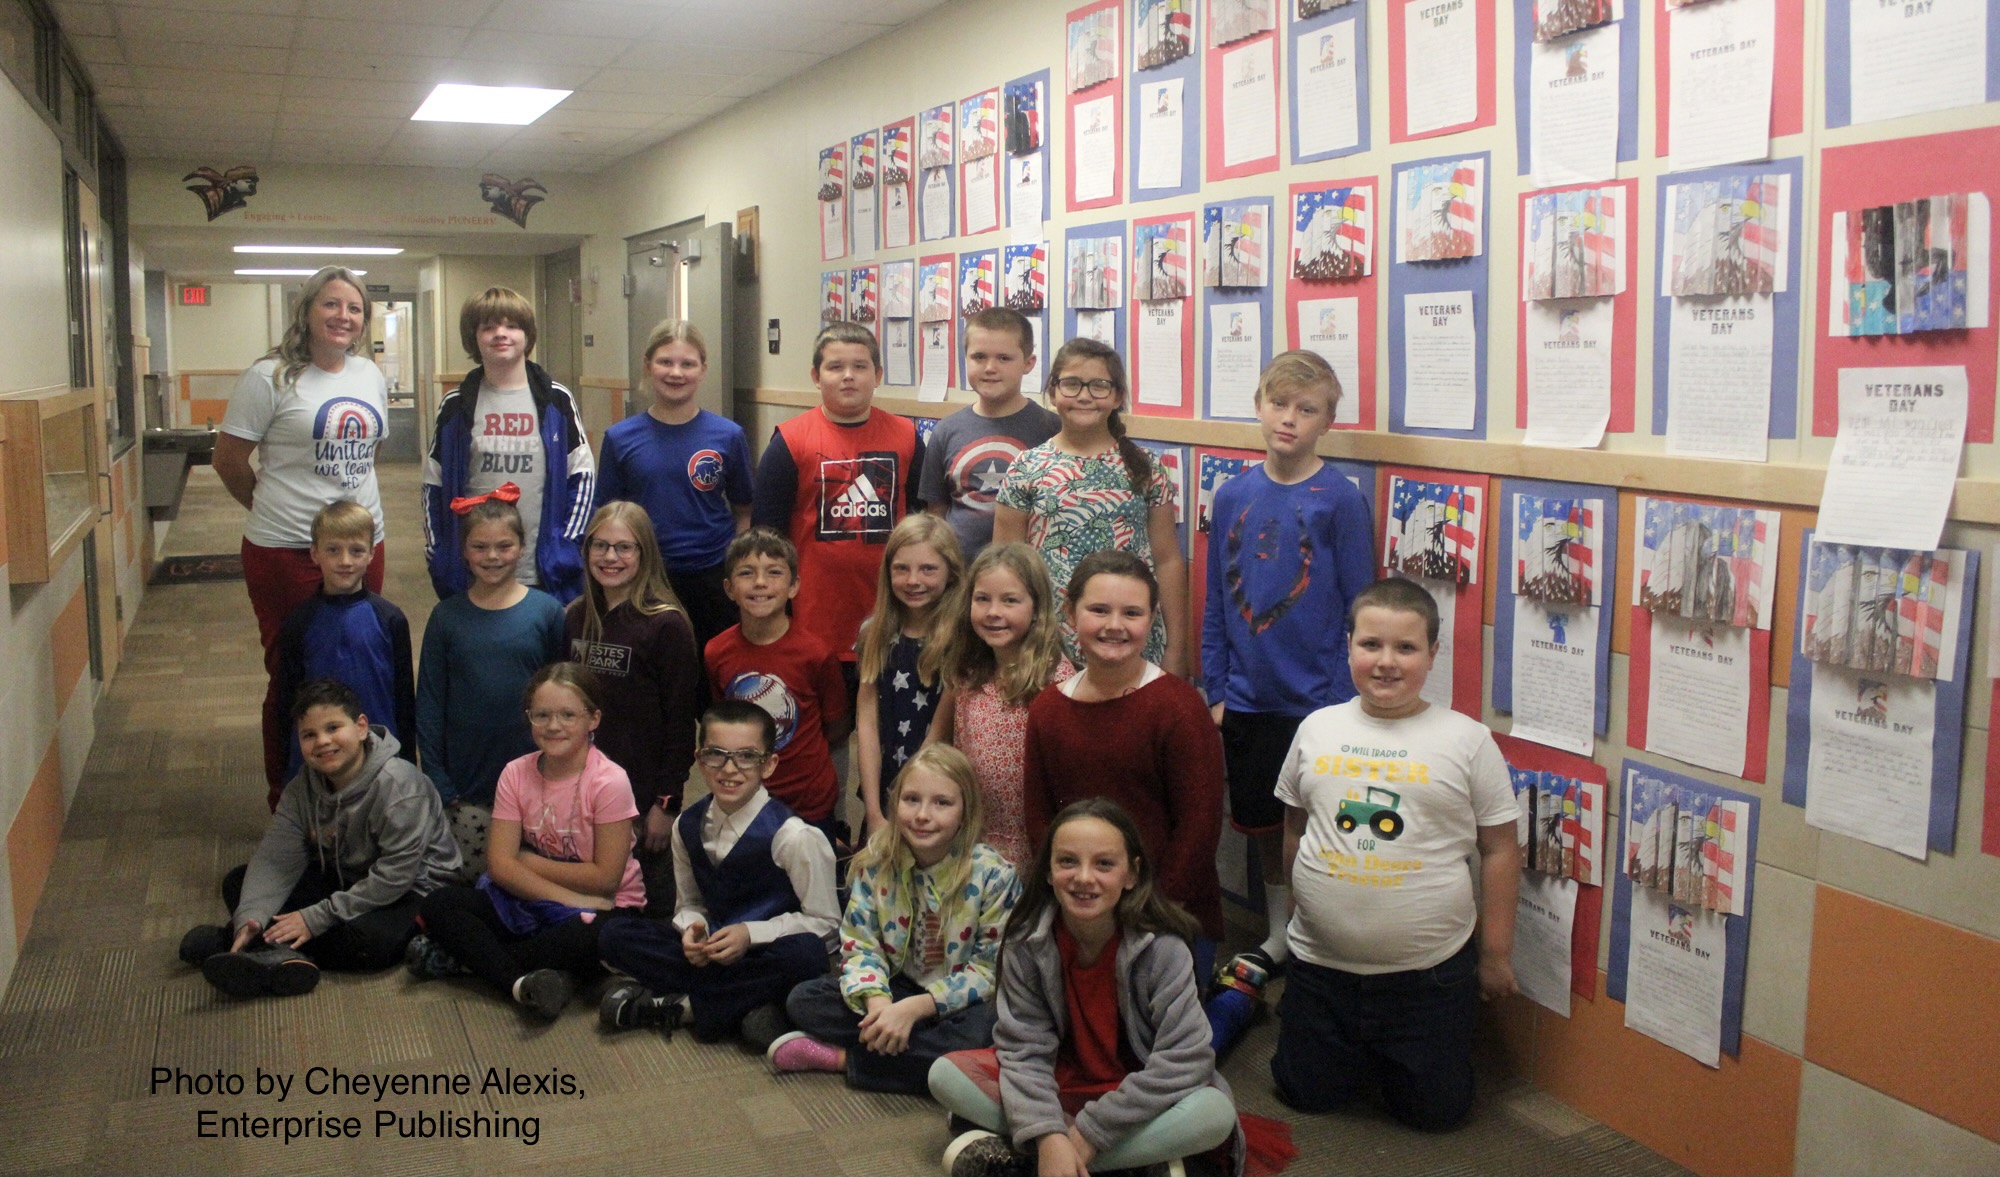 Kathryn Omer's fourth grade class created agamographs for Veterans Day. Pictured front from left, Shawn Russell, Camryn Christensen, Gerald Taylor, Luca Slatten and Samantha Waters. Middle row from left, Wesley Bahle, Elaina Keough, Claire Husk, Camden Dowling, Dylen Iwen, Kaelyn Bryan, Kaitlyn Gochanour and Dustin Smith. Back row from left, Omer, Jagger Smith, Tinsley Ross, Hunter Colburn, Beau Theyer-Menke, Emma Roberts and Tyson Knight.